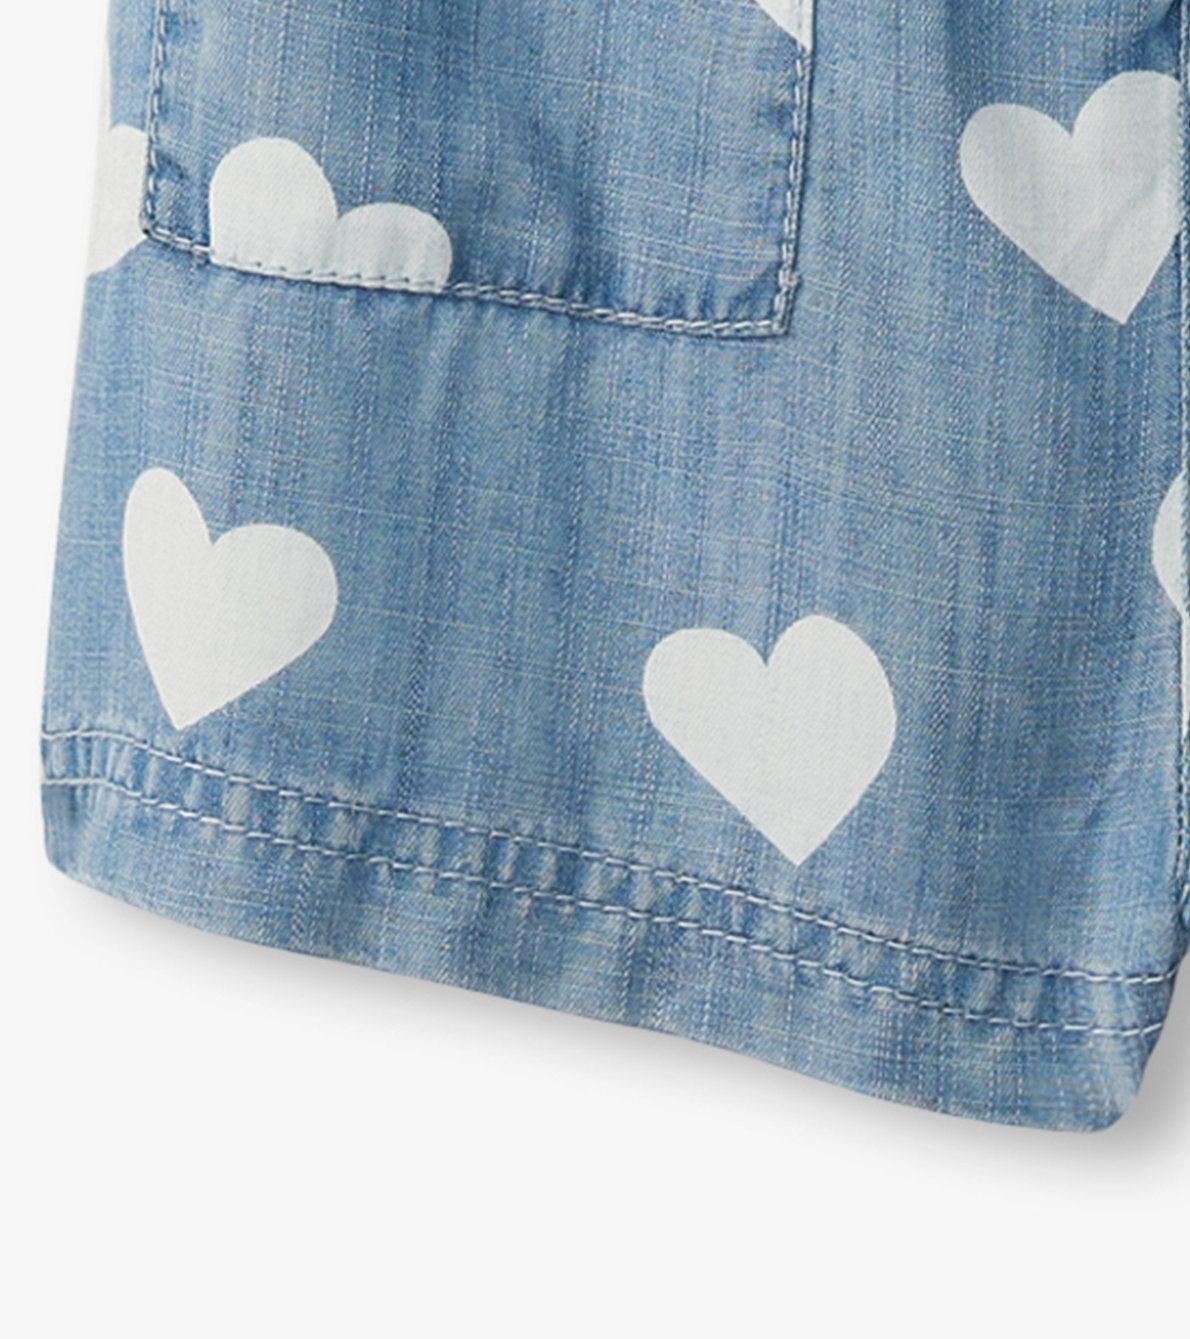 View larger image of Girls Hearts Slouchy Overalls